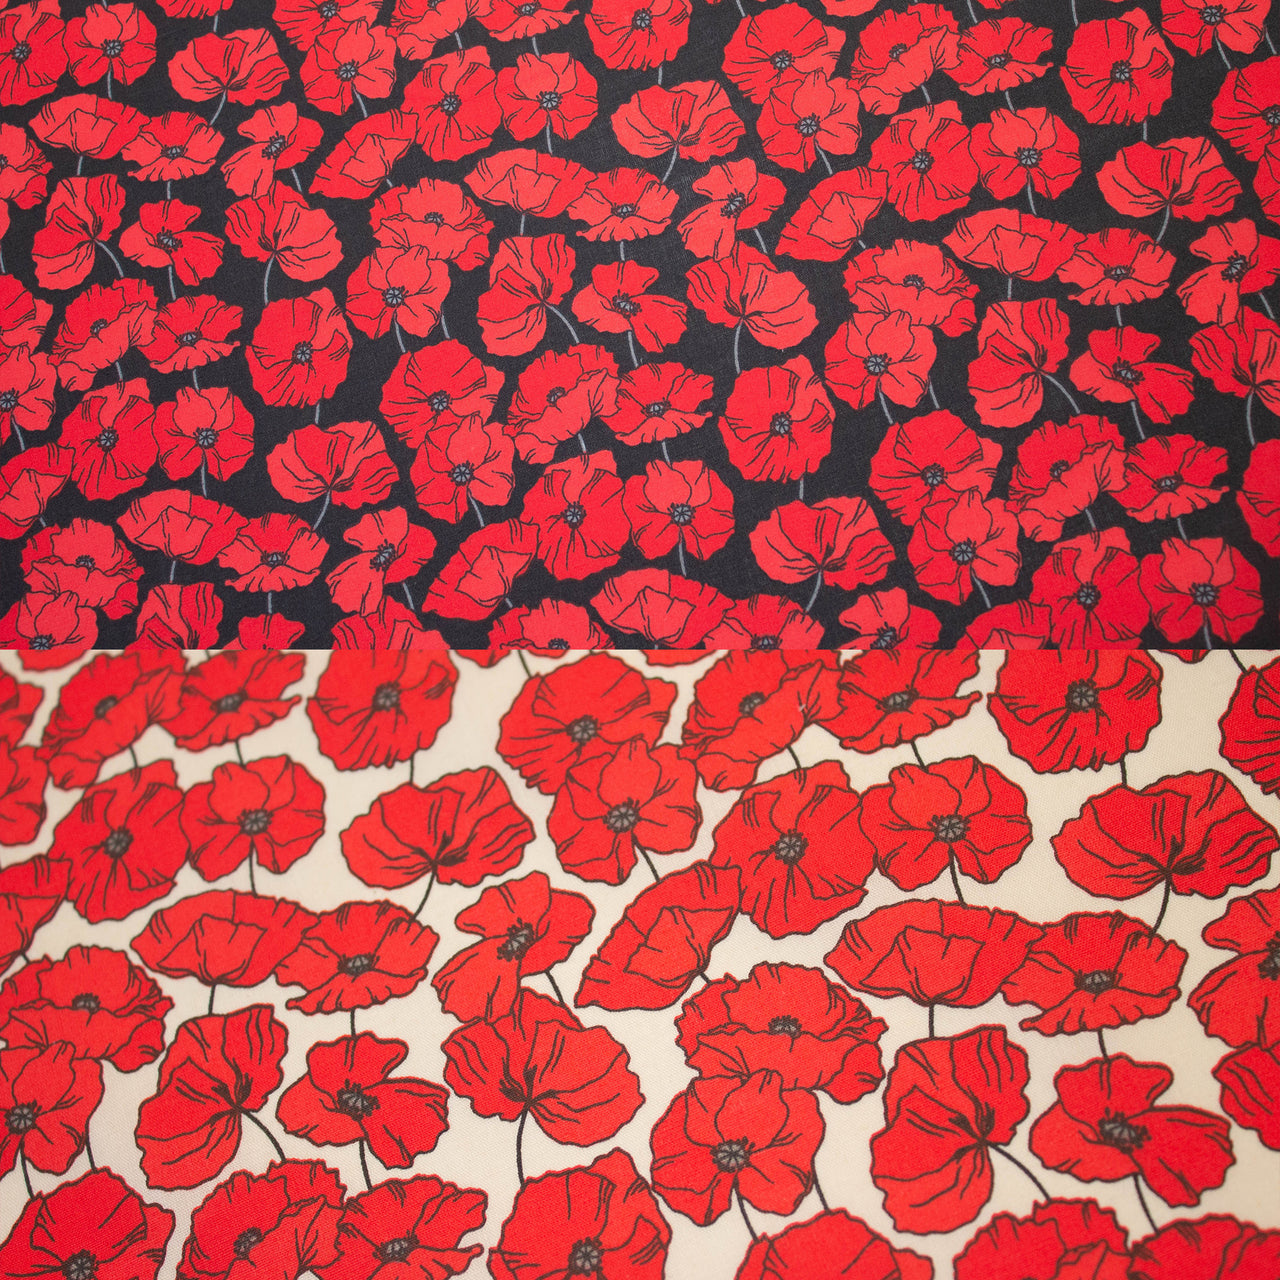 Poppy Poppies Flower for Remembrance Sunday - Printed Poly Cotton Fabric